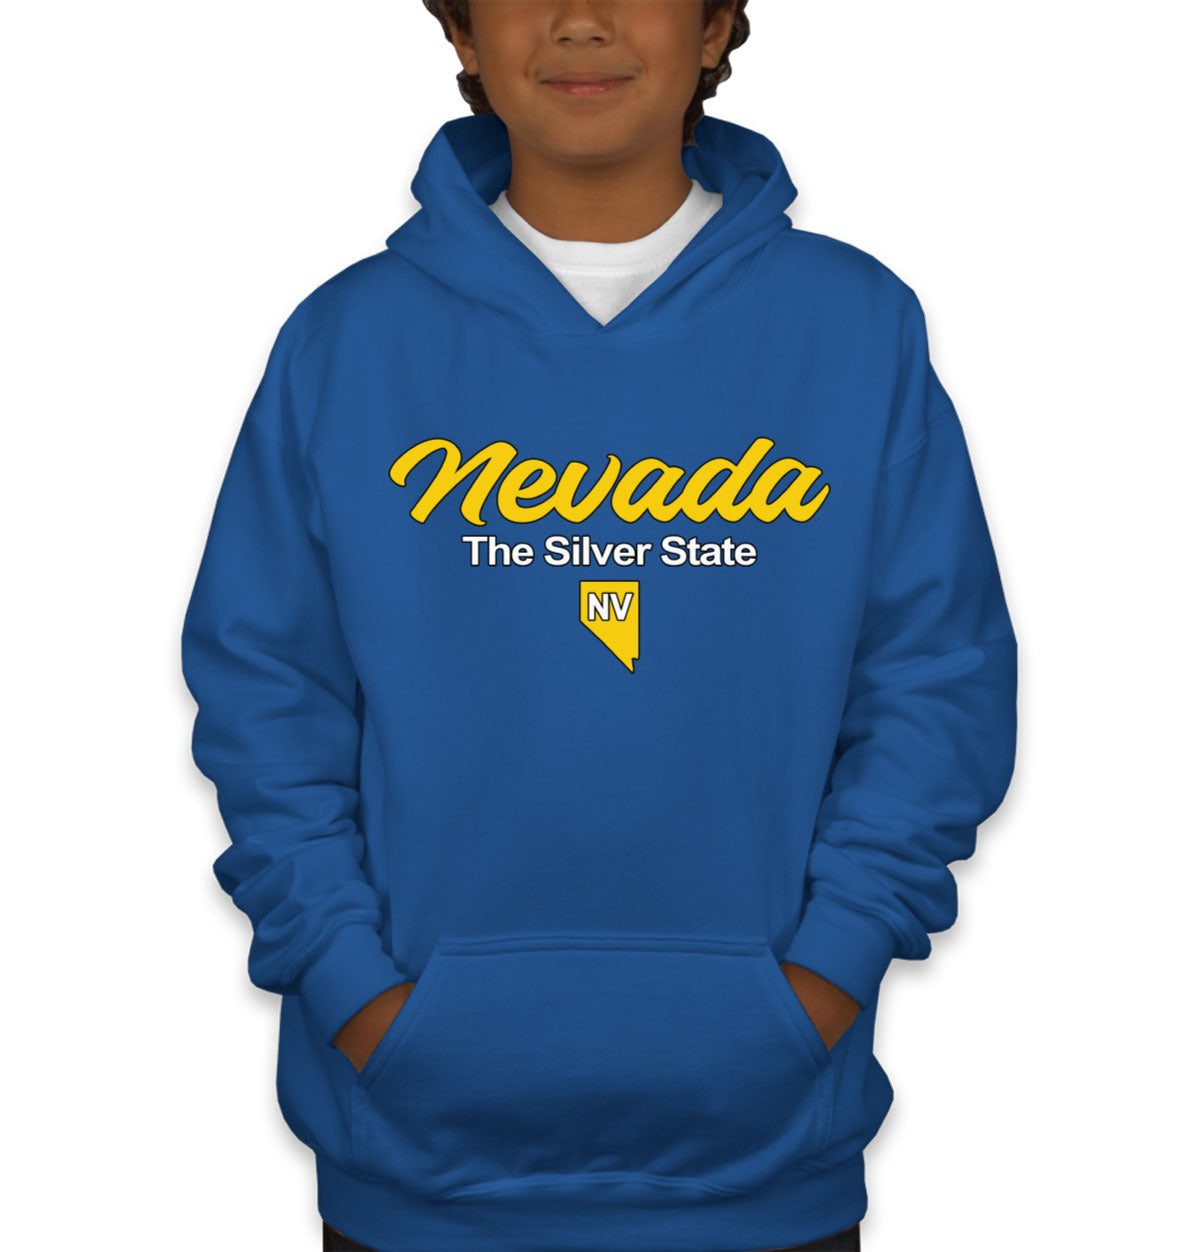 Nevada The Silver State Youth Hoodie